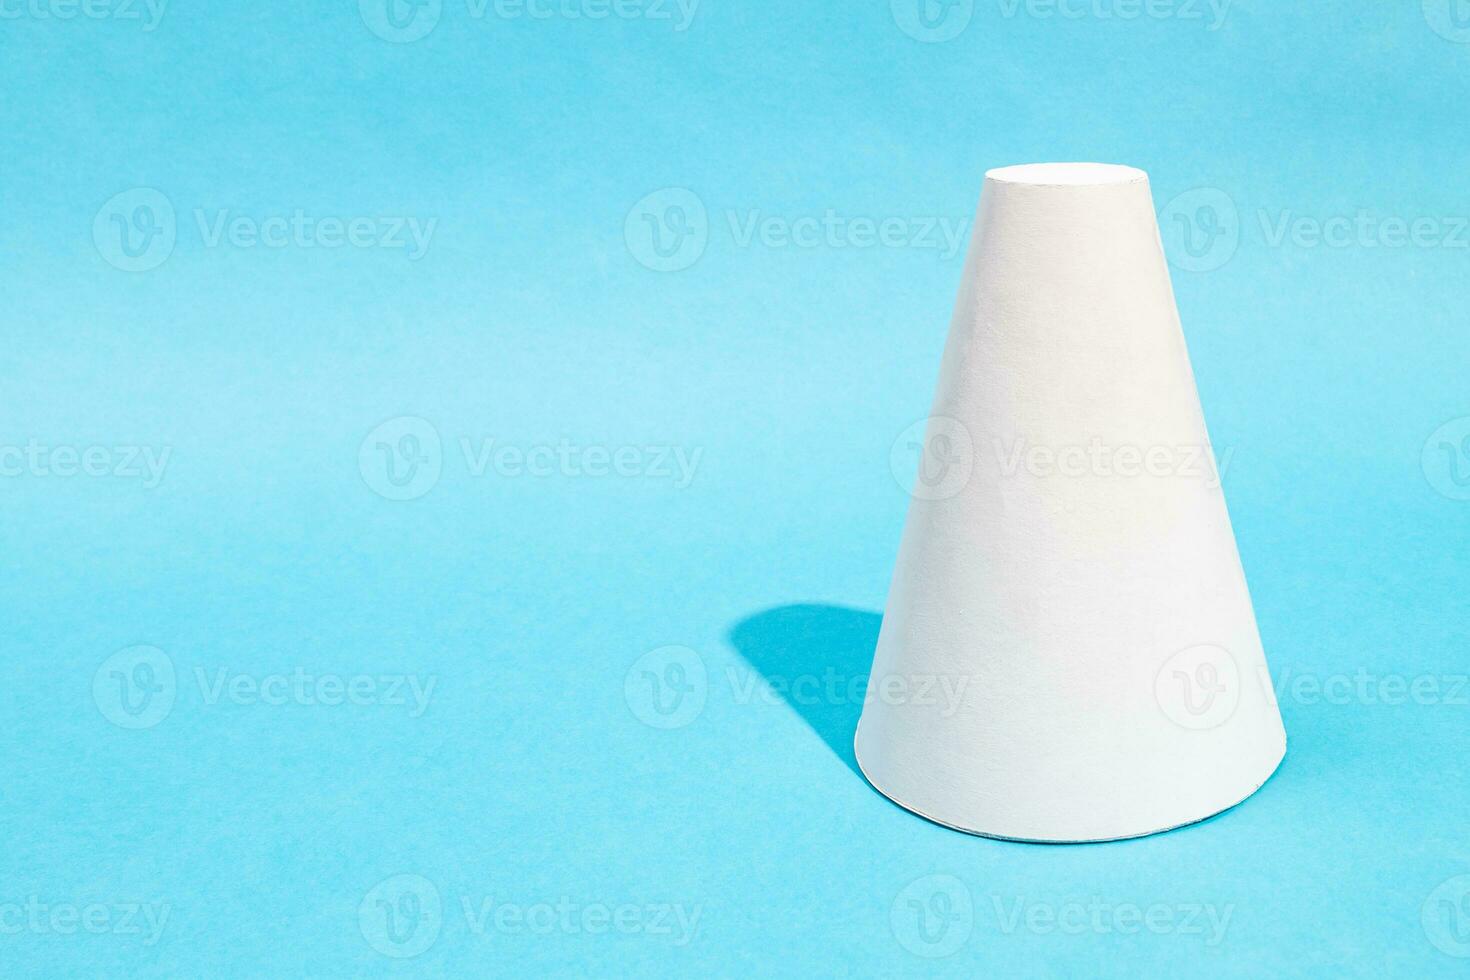 hand-crafted paper frustum cone on turquoise blue photo